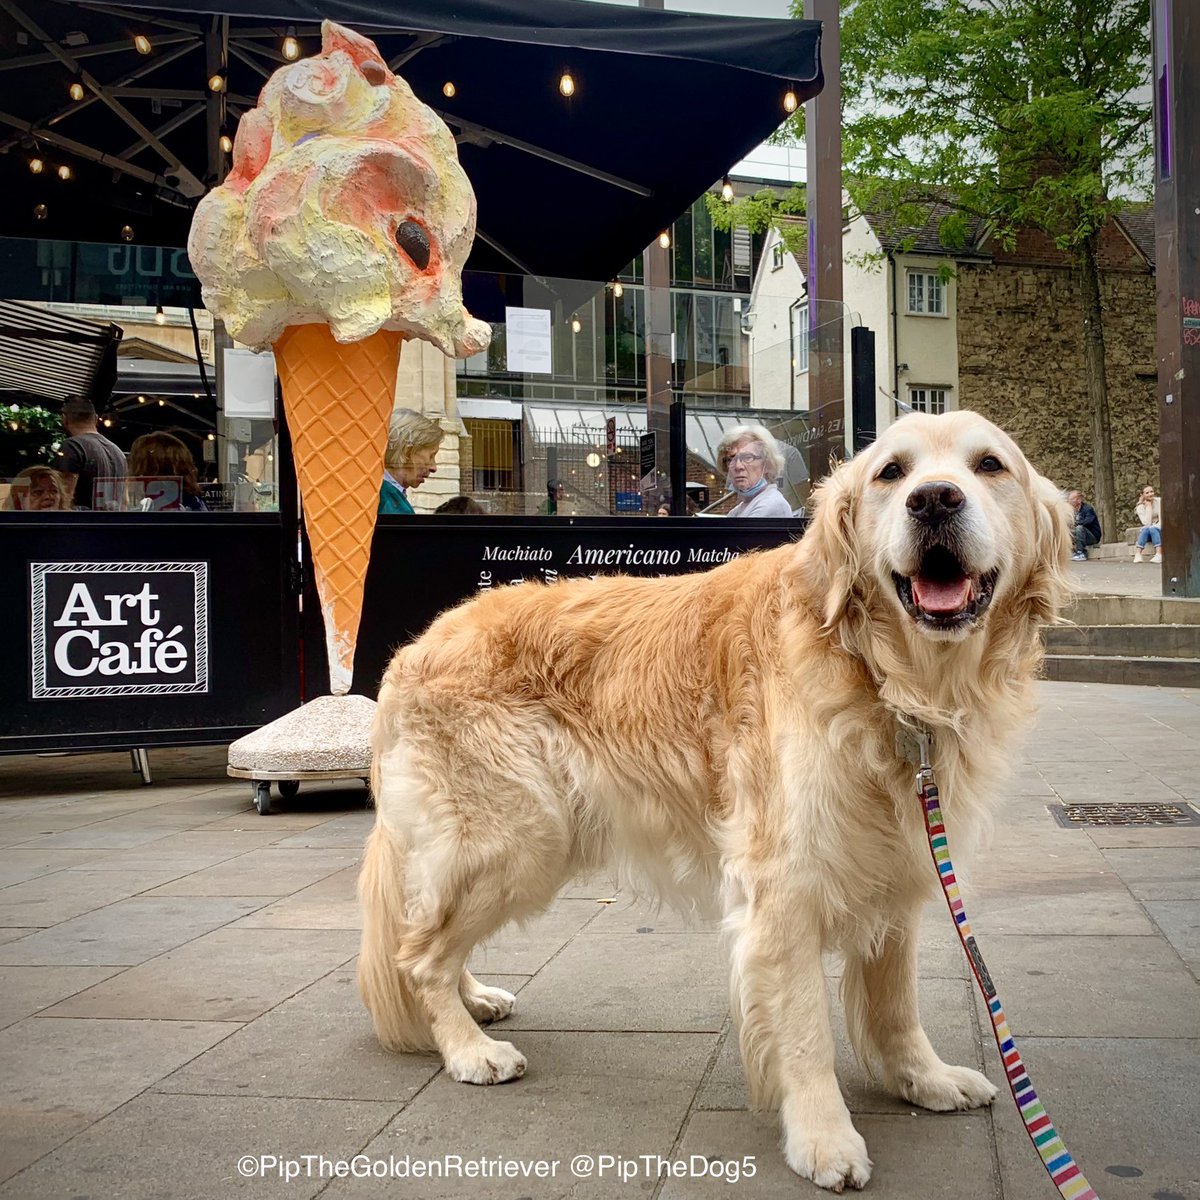 🍦🐶🍨

Breaking news: ice cream is available on #WorldSocialMediaDay.

I got the scoop. 😉

#GoldenRetrievers 🐕😀🐾 #DogsOfTwitter